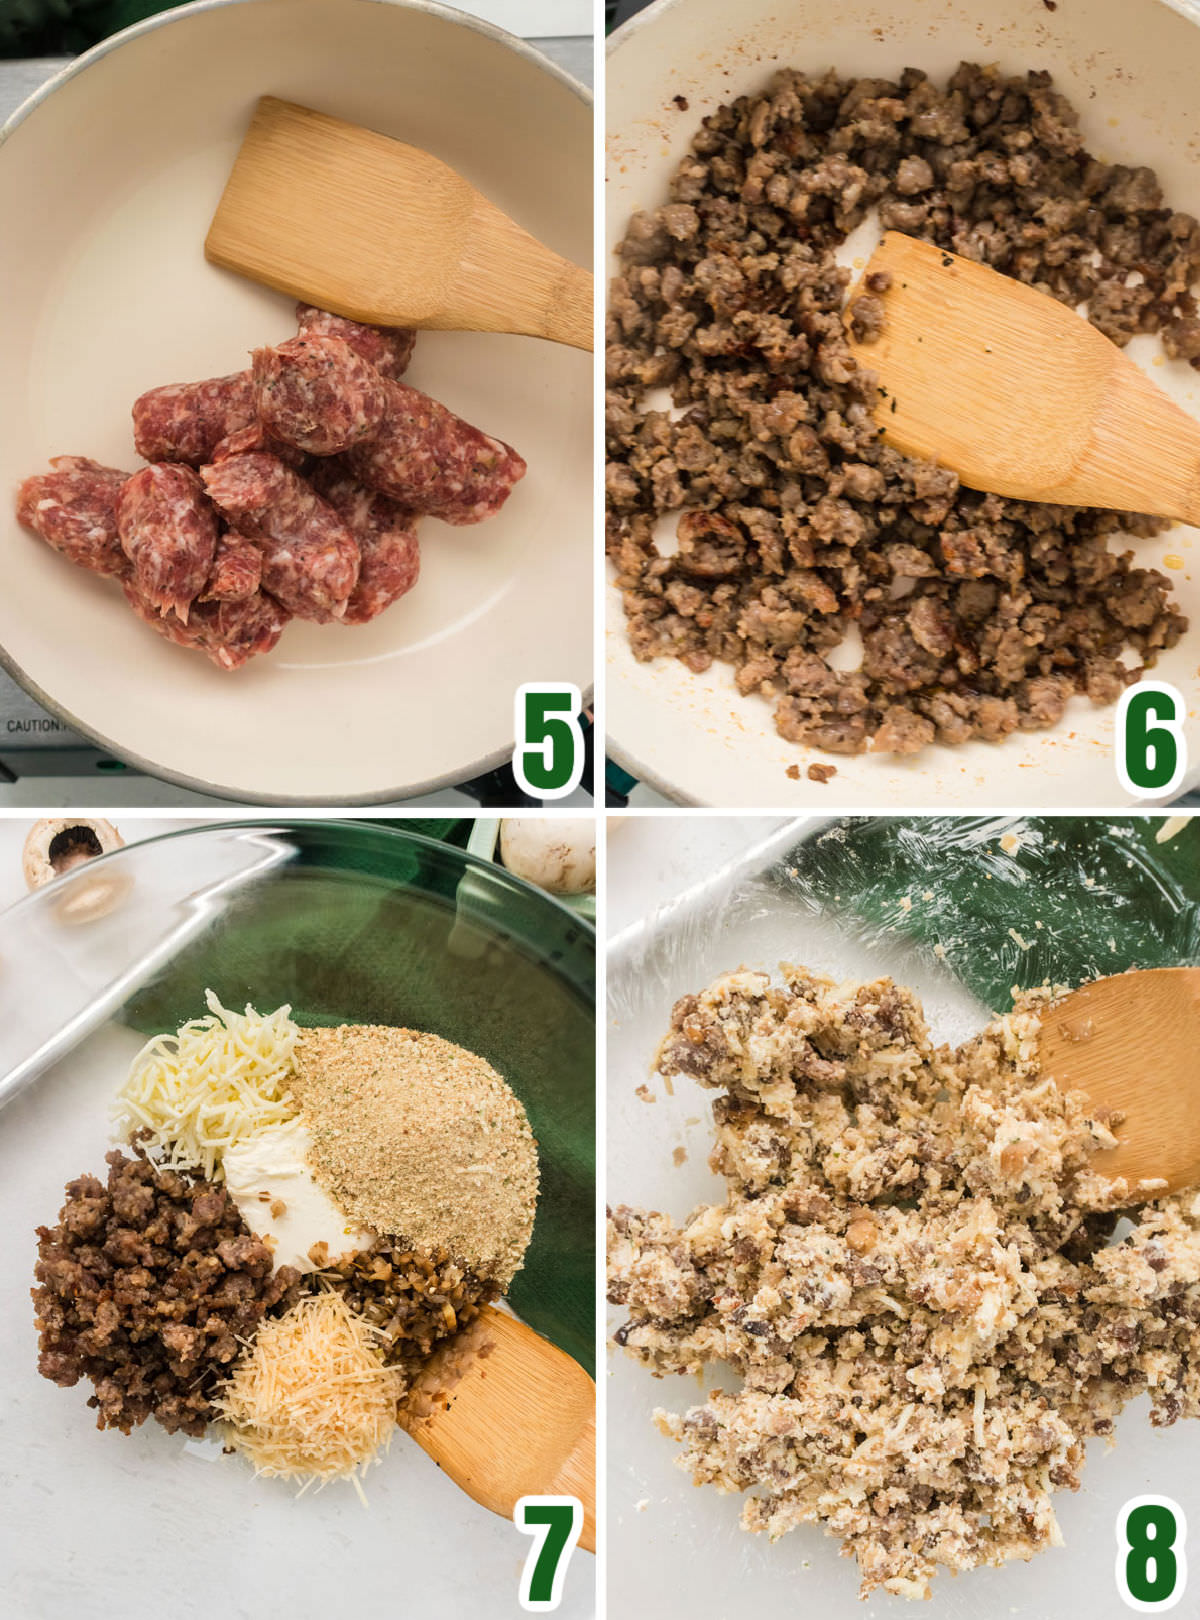 Collage image showing how to make the sausage mushroom stuffing mixture.